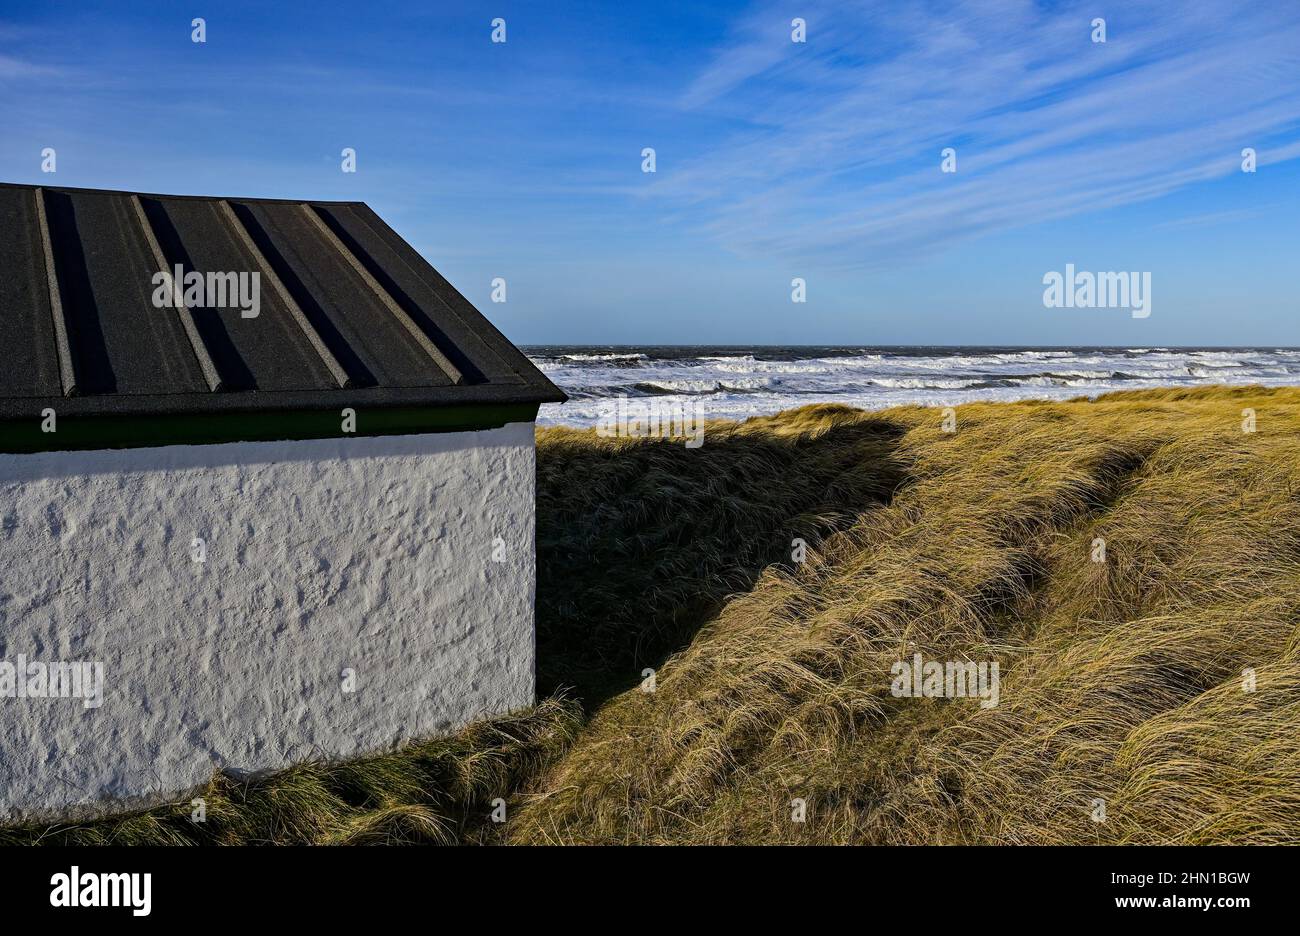 Stenbjerg, Denmark. 30th Jan, 2022. View over the dune landscape in Thy National Park on the North Sea coast. On the west coast of Jutland, between the lighthouse in Hanstholm and the Agger Tange, is Denmark's first and largest national park Thy with a total of 244 square kilometers of unspoiled and magnificent nature. Credit: Patrick Pleul/dpa-Zentralbild/ZB/dpa/Alamy Live News Stock Photo